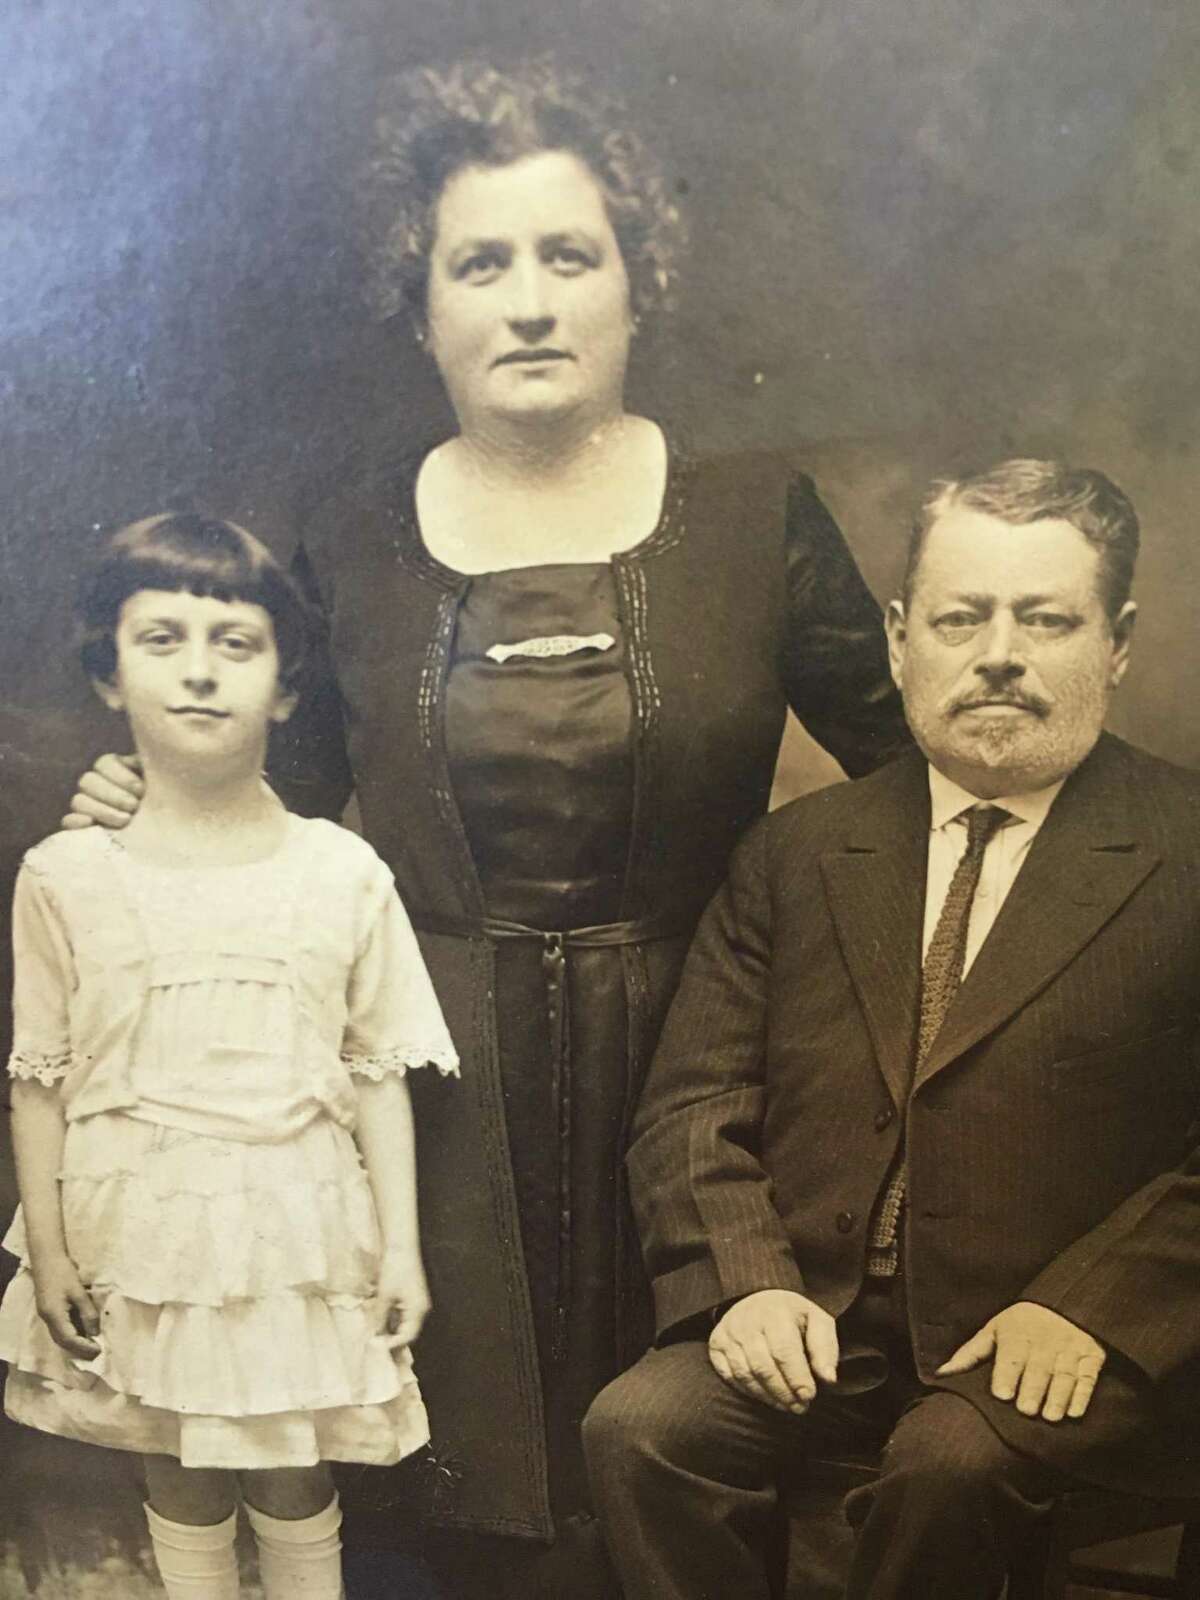 Joel Levitt’s maternal grandparents, Tillie and Isaac Kaplan, and his mother, Anna, in Brooklyn N.Y. in 1920.